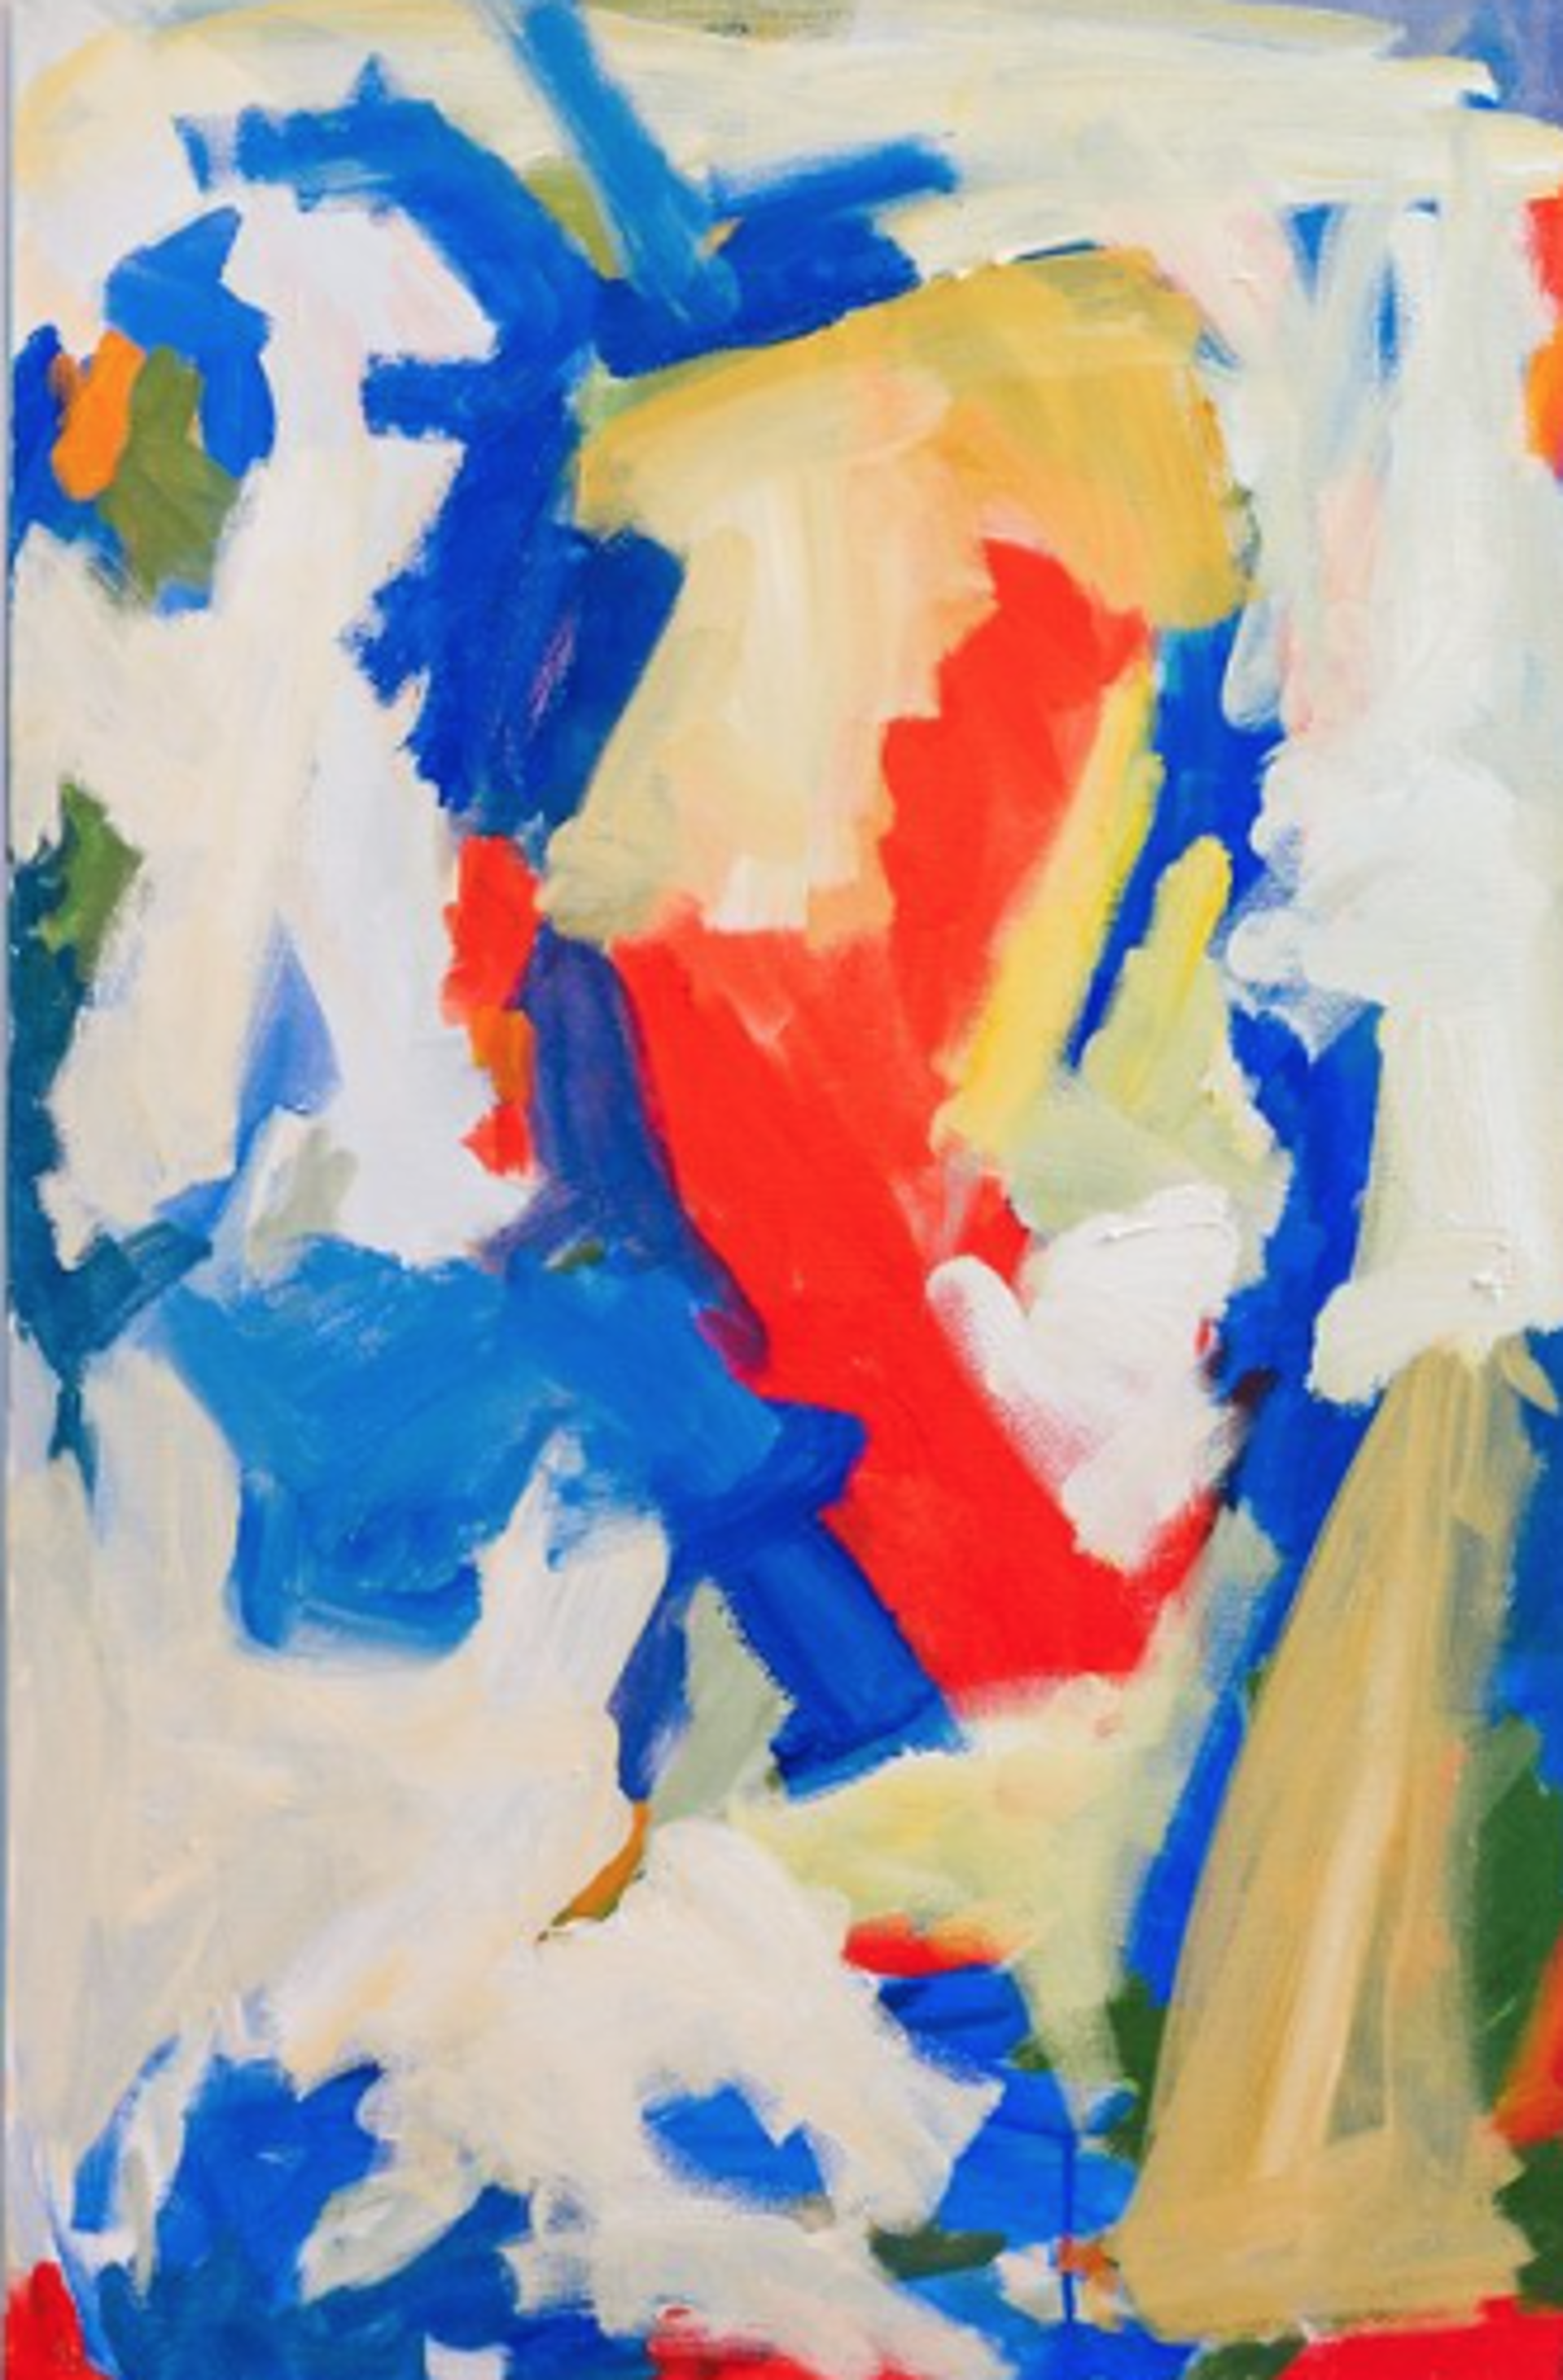 Bold Primary Colors by Christina Chang